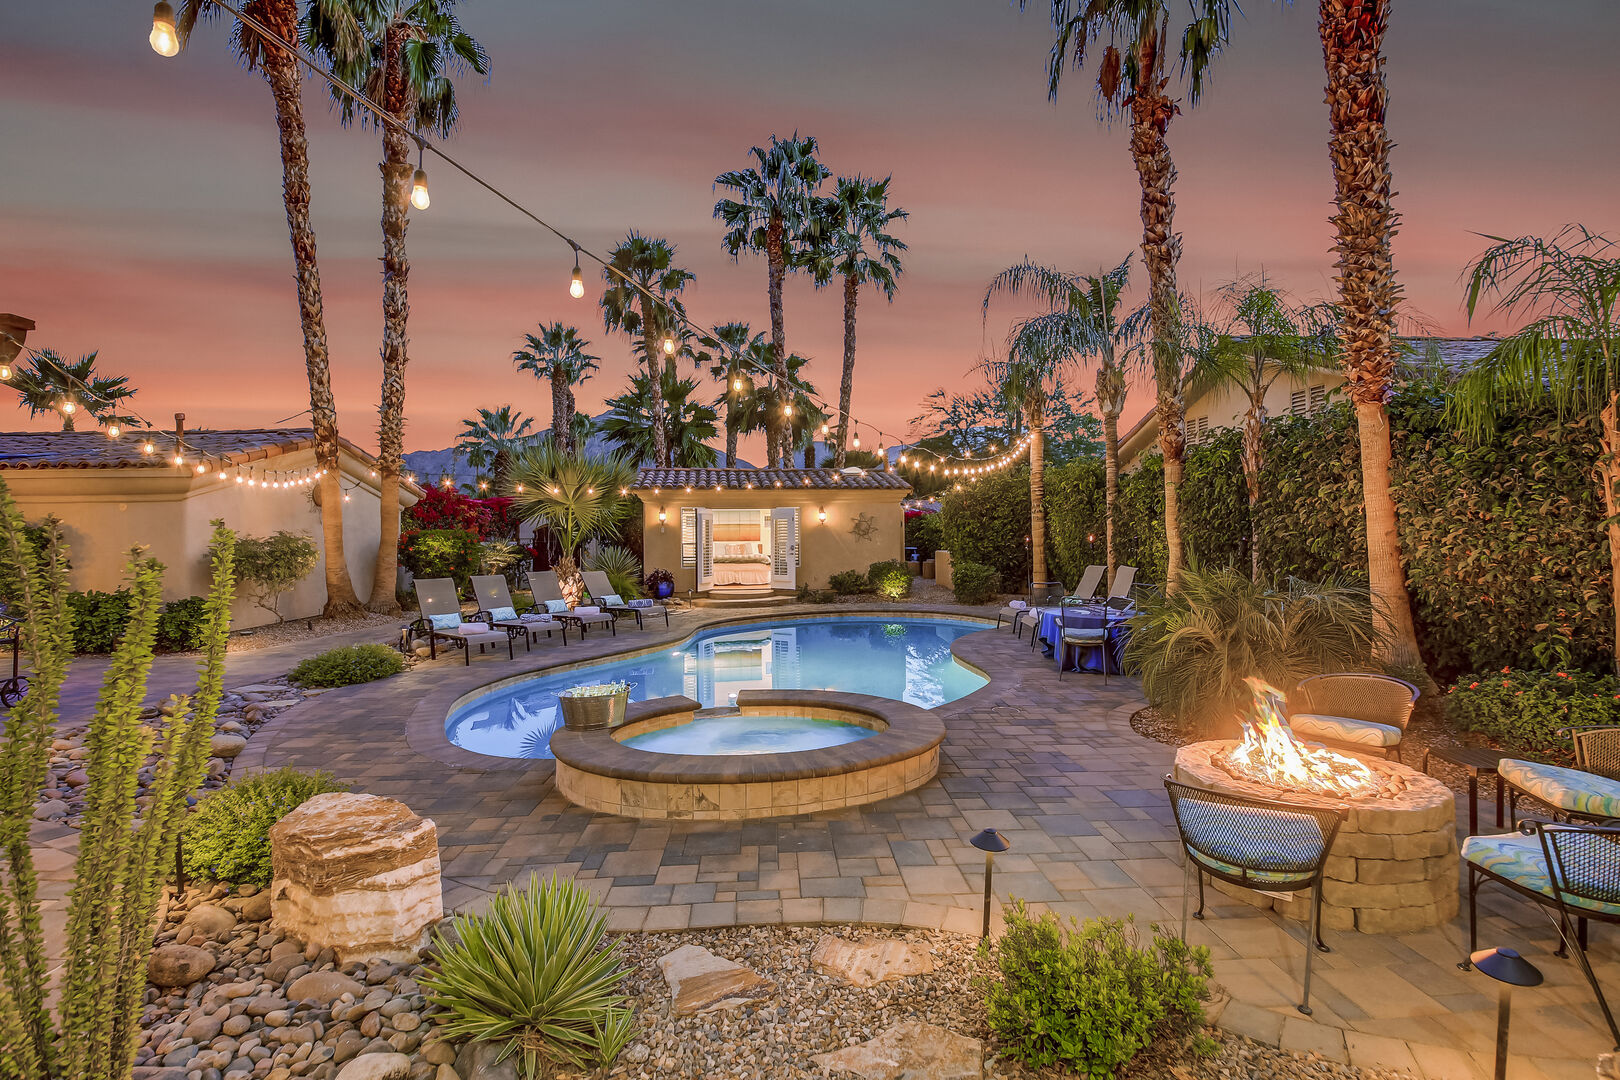 This backyard offer so much room it will feel like a private resort.